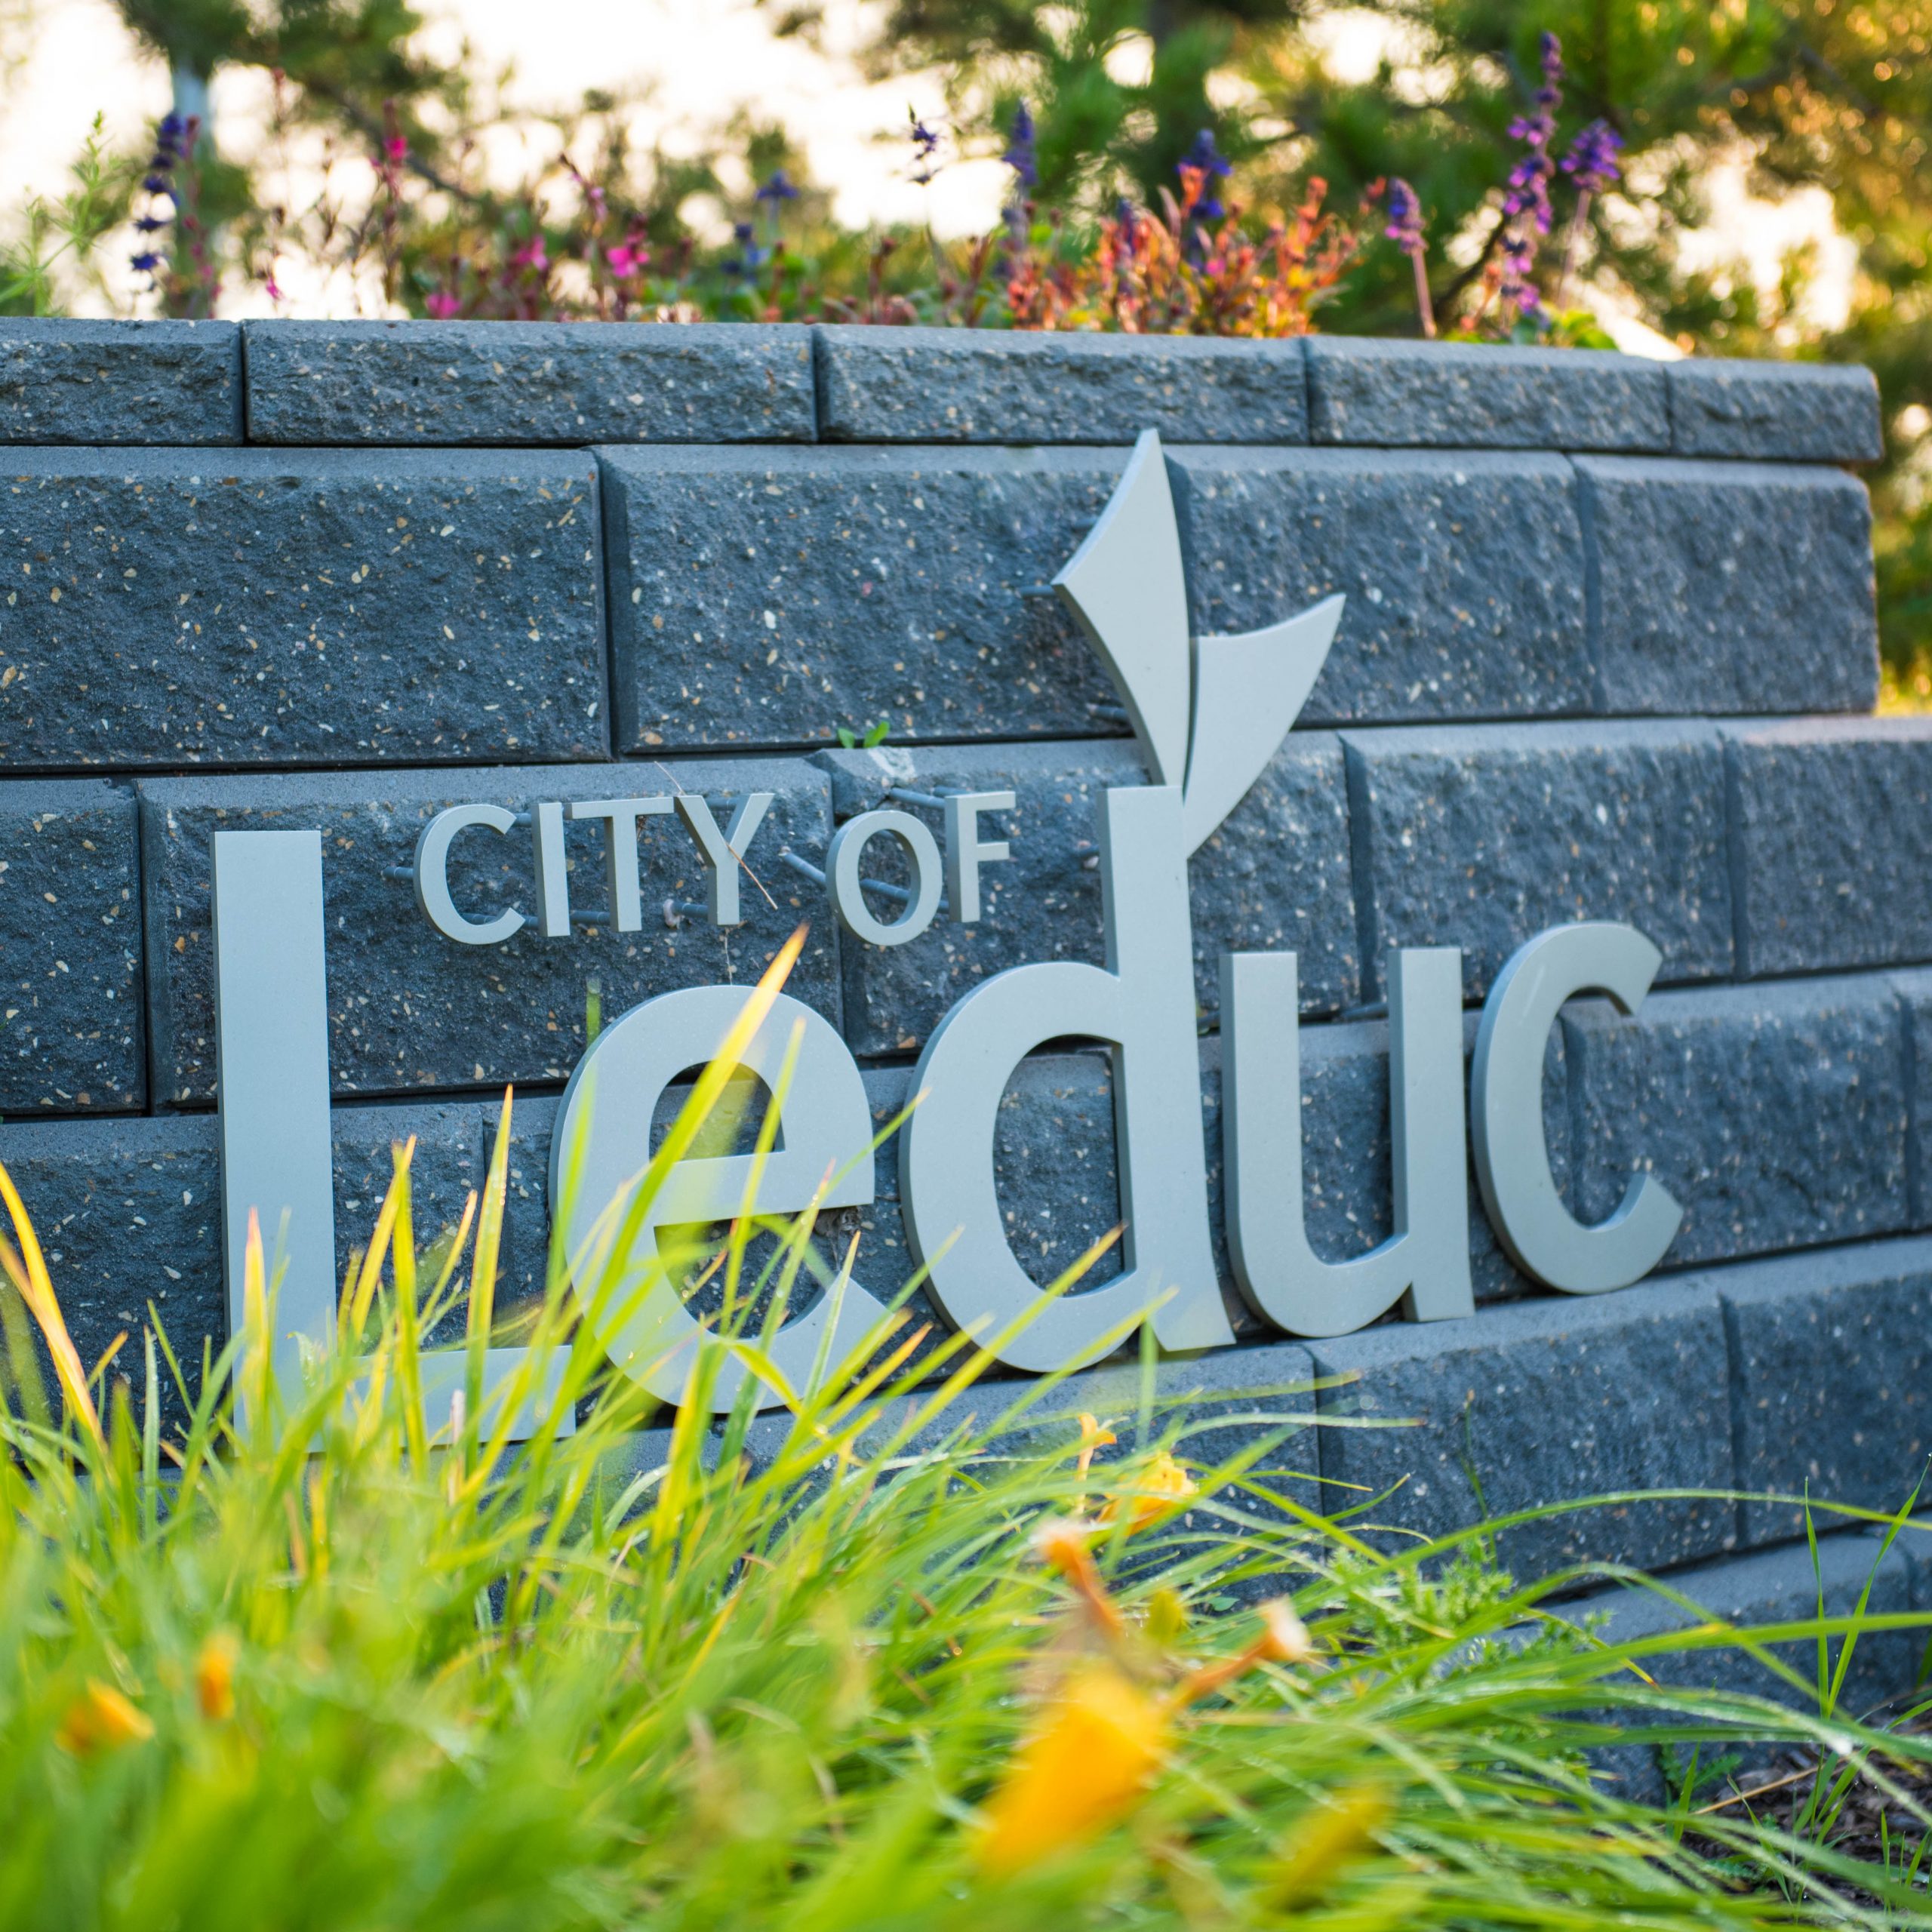 City of Leduc sign on stone wall with daylilies in the foreground